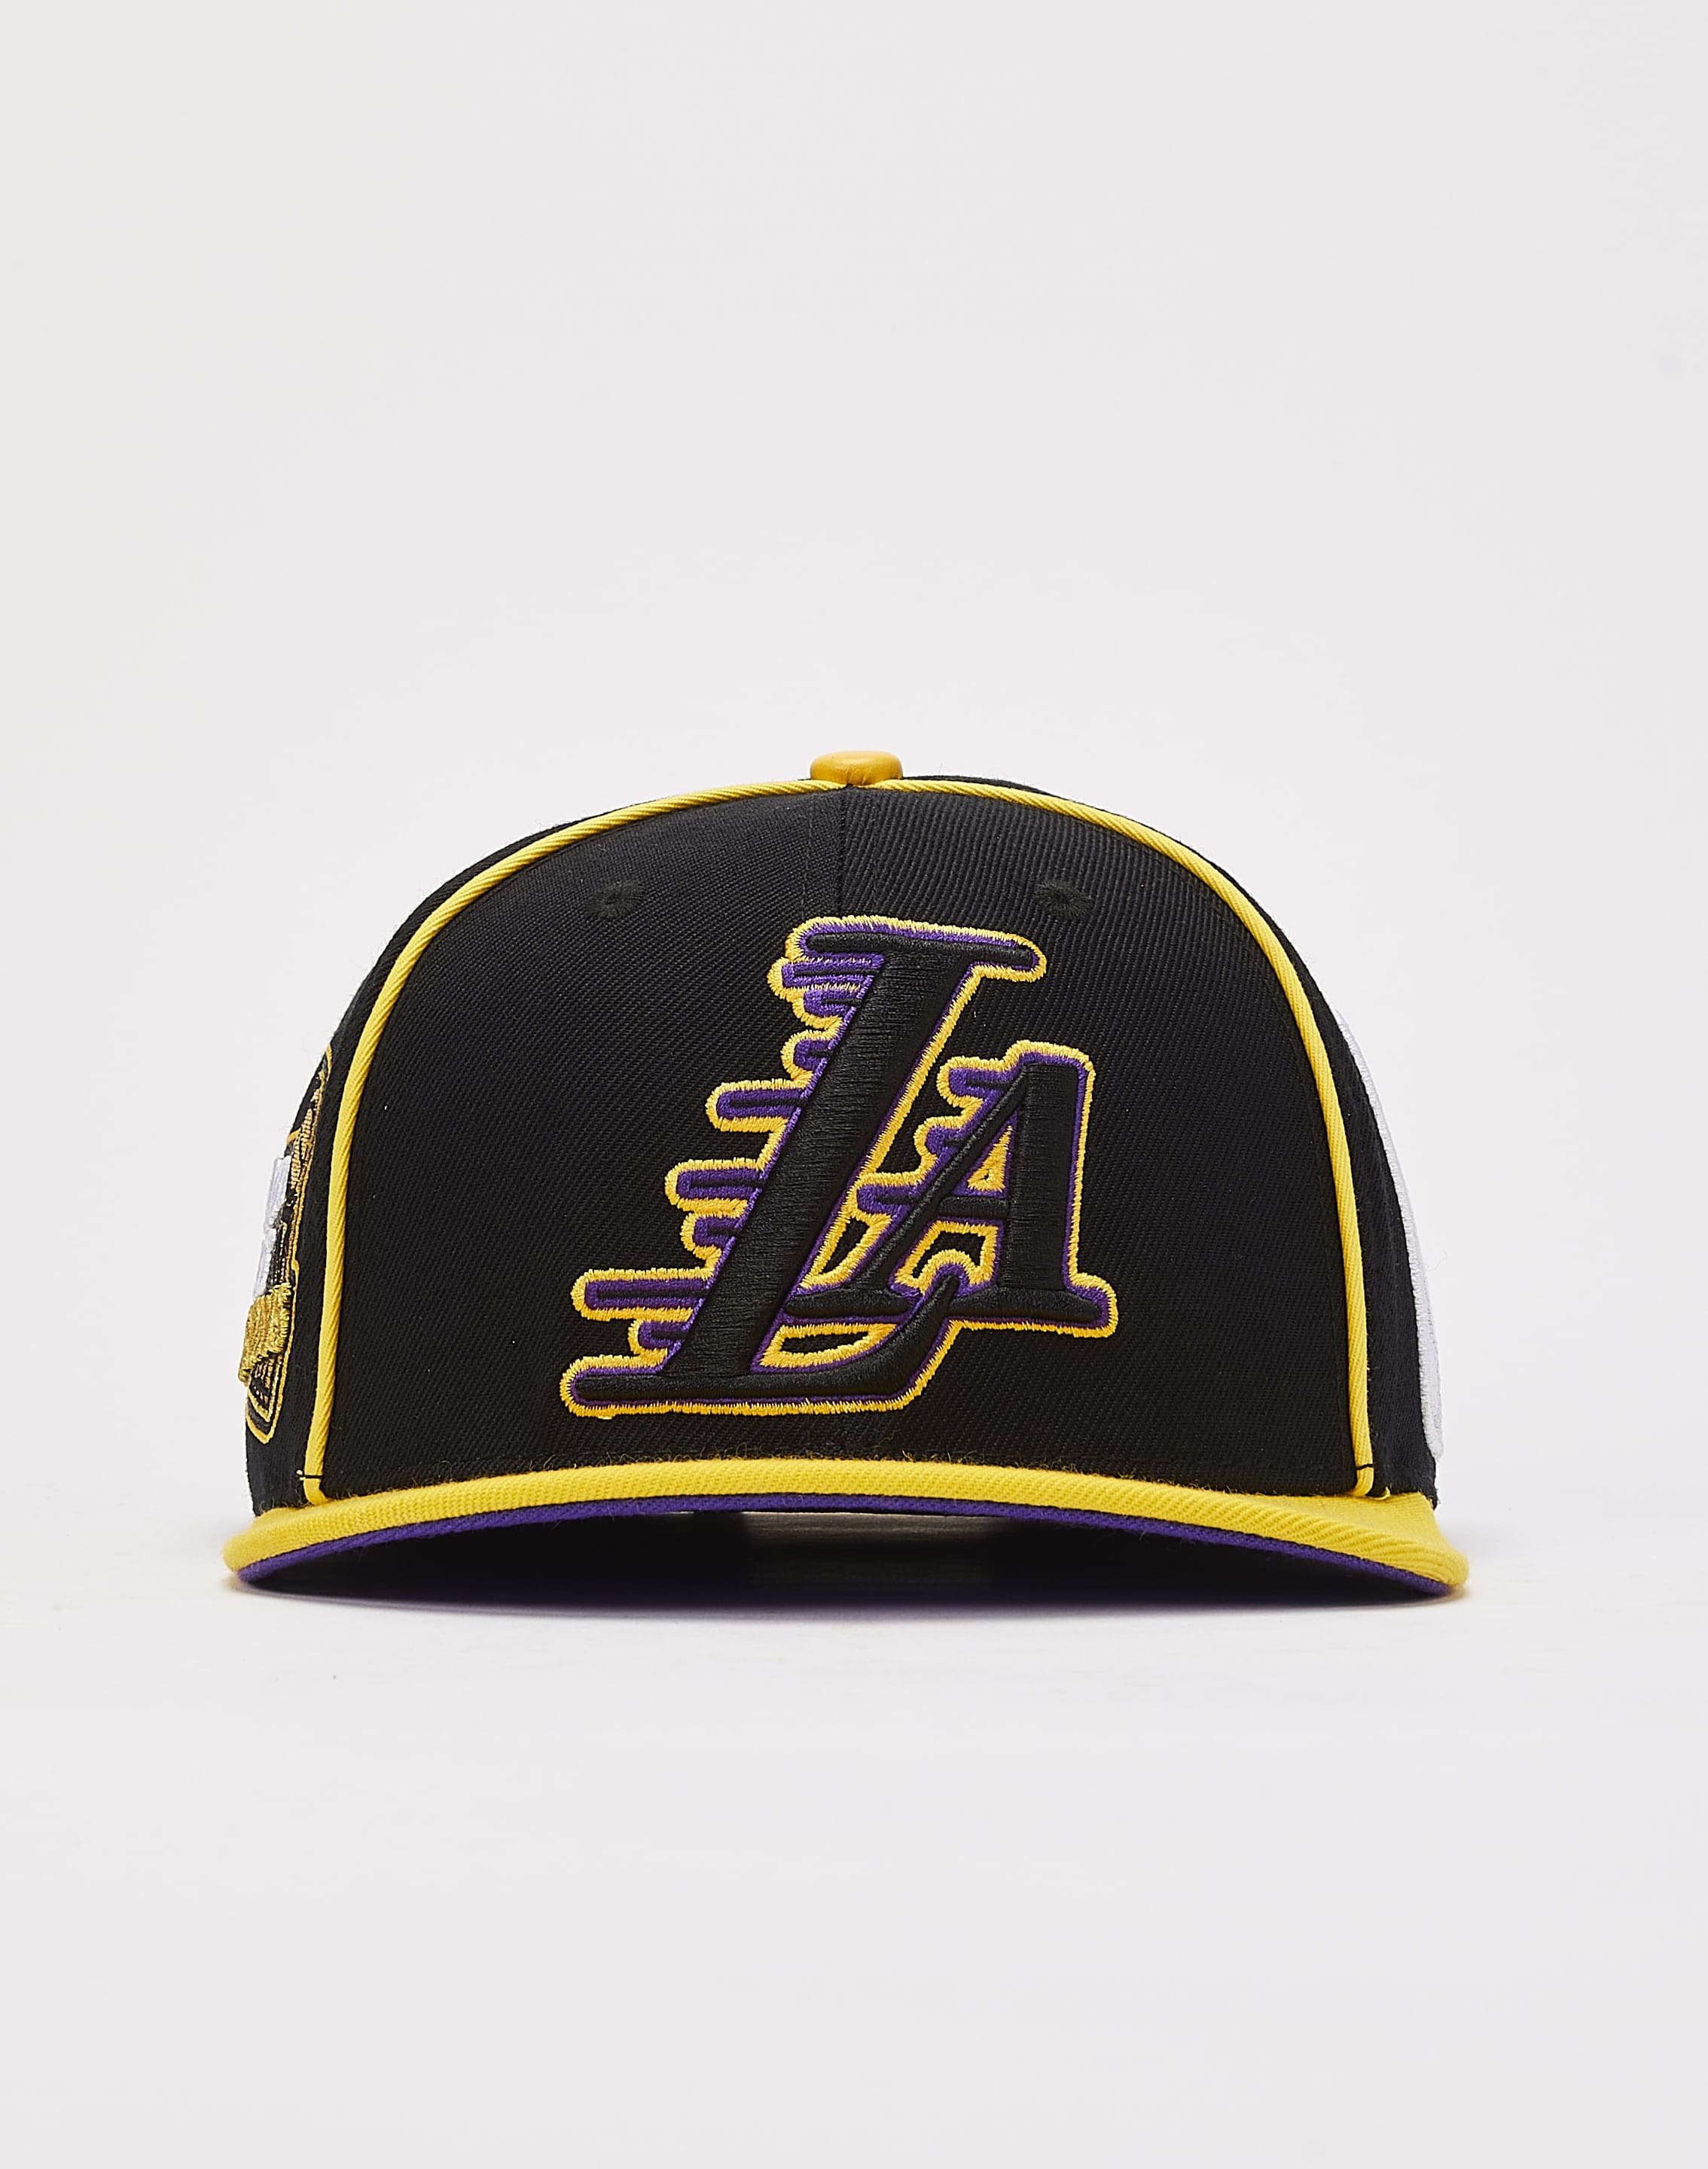 Adidas Lakers Hats for Men